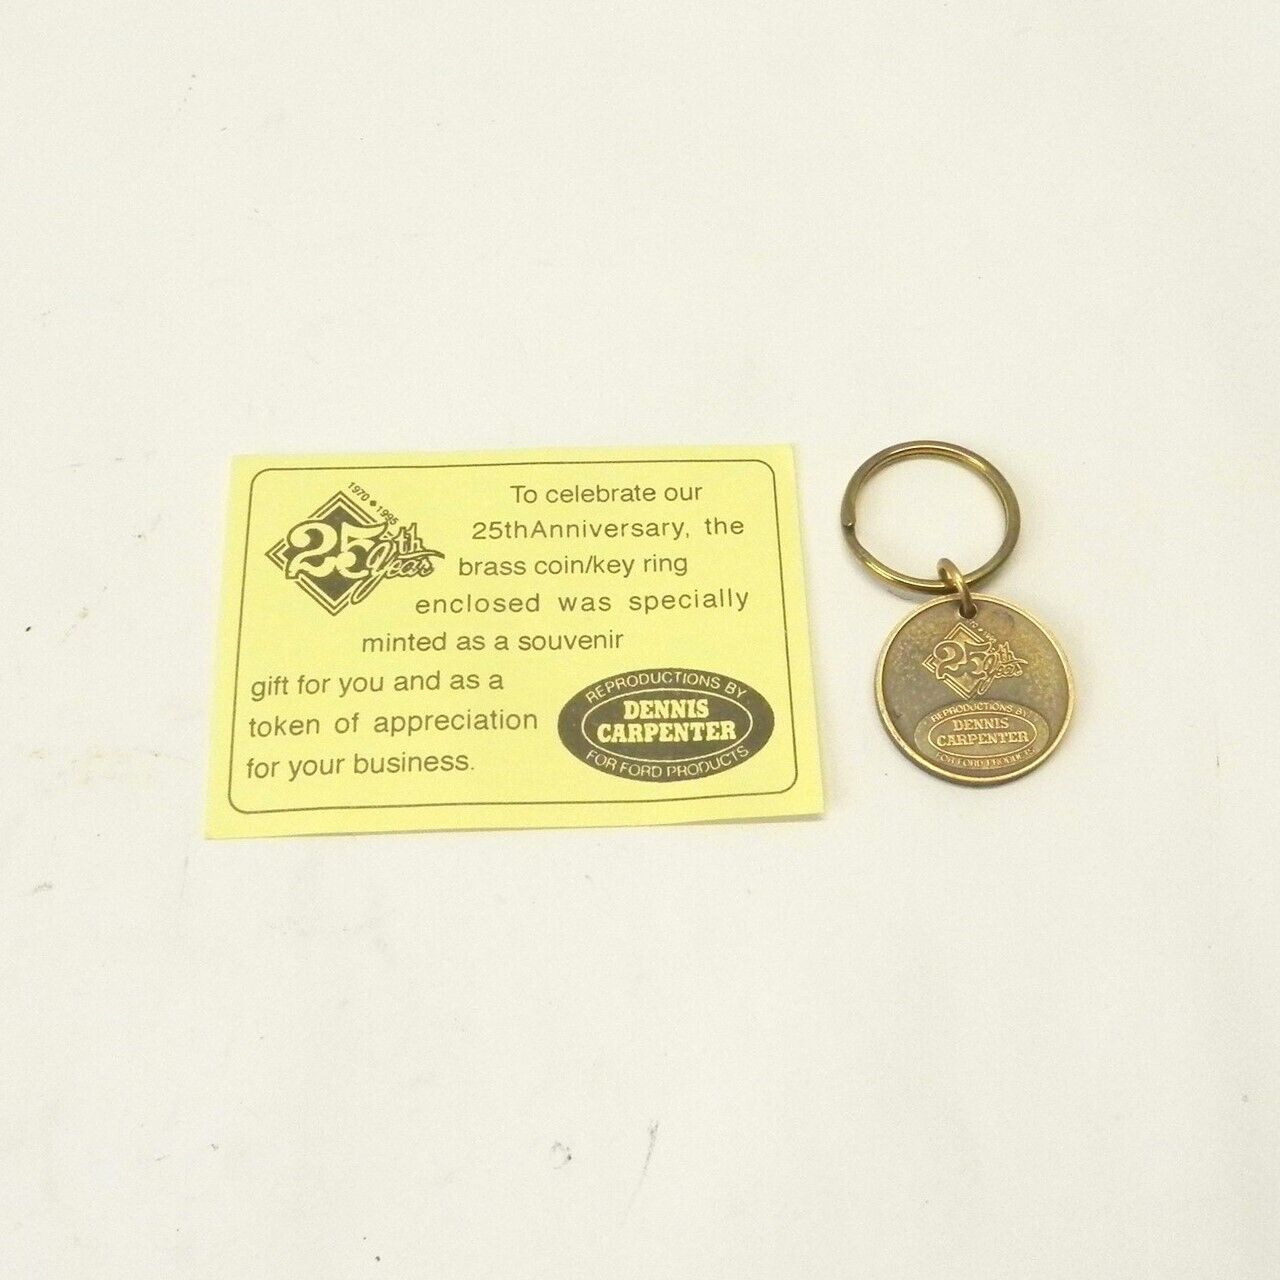 VINTAGE DENNIS CARPENTER FORD 25TH ANNIVERSARY KEY RING 1940 FORD CONVERTIBLE   